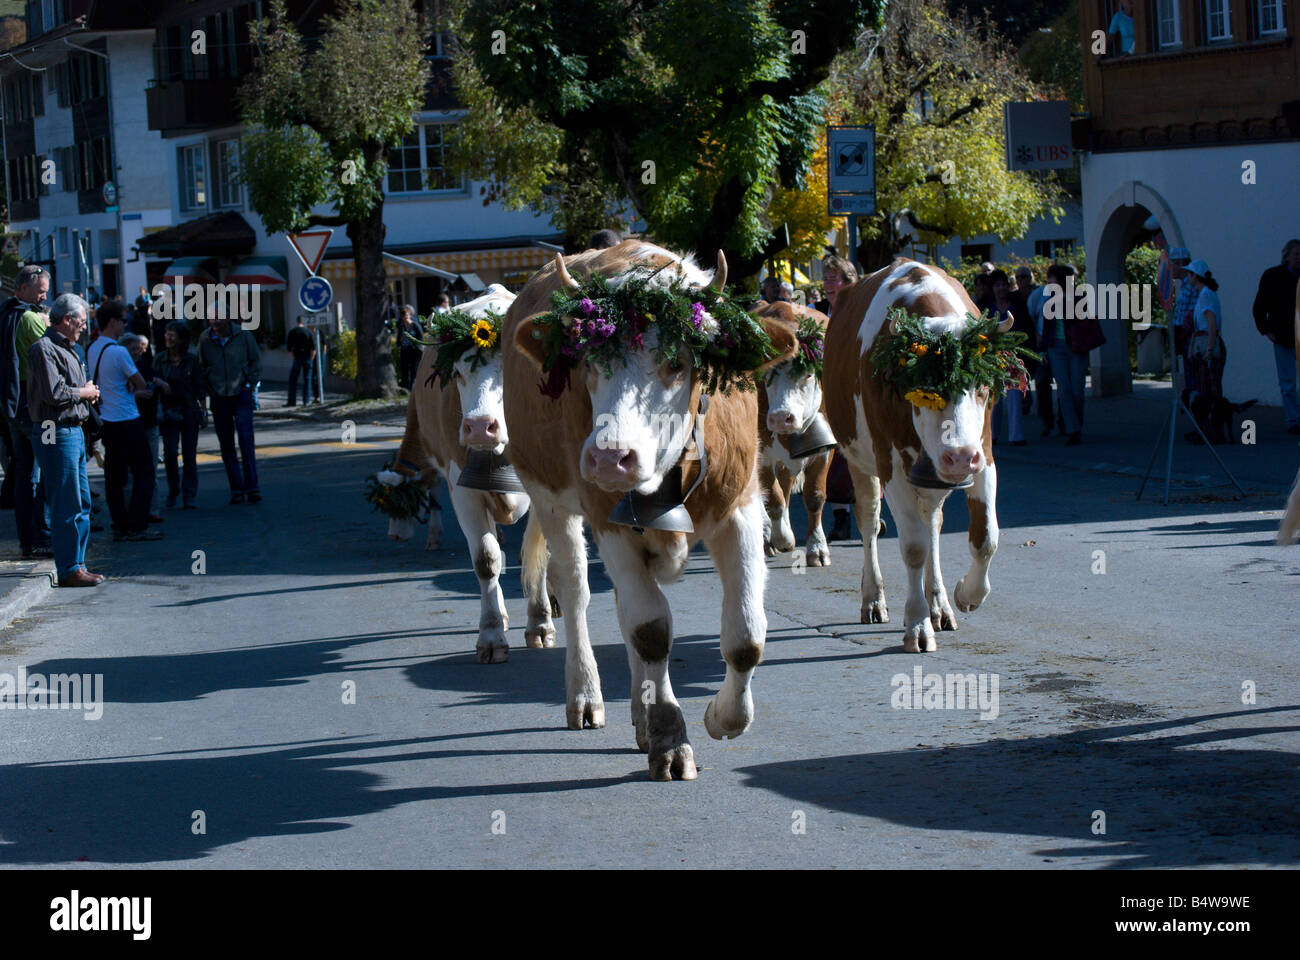 Cows wearing a flower headdress for the annual Alpenfest and crowning of the queen; Lenk, Switzerland Stock Photo